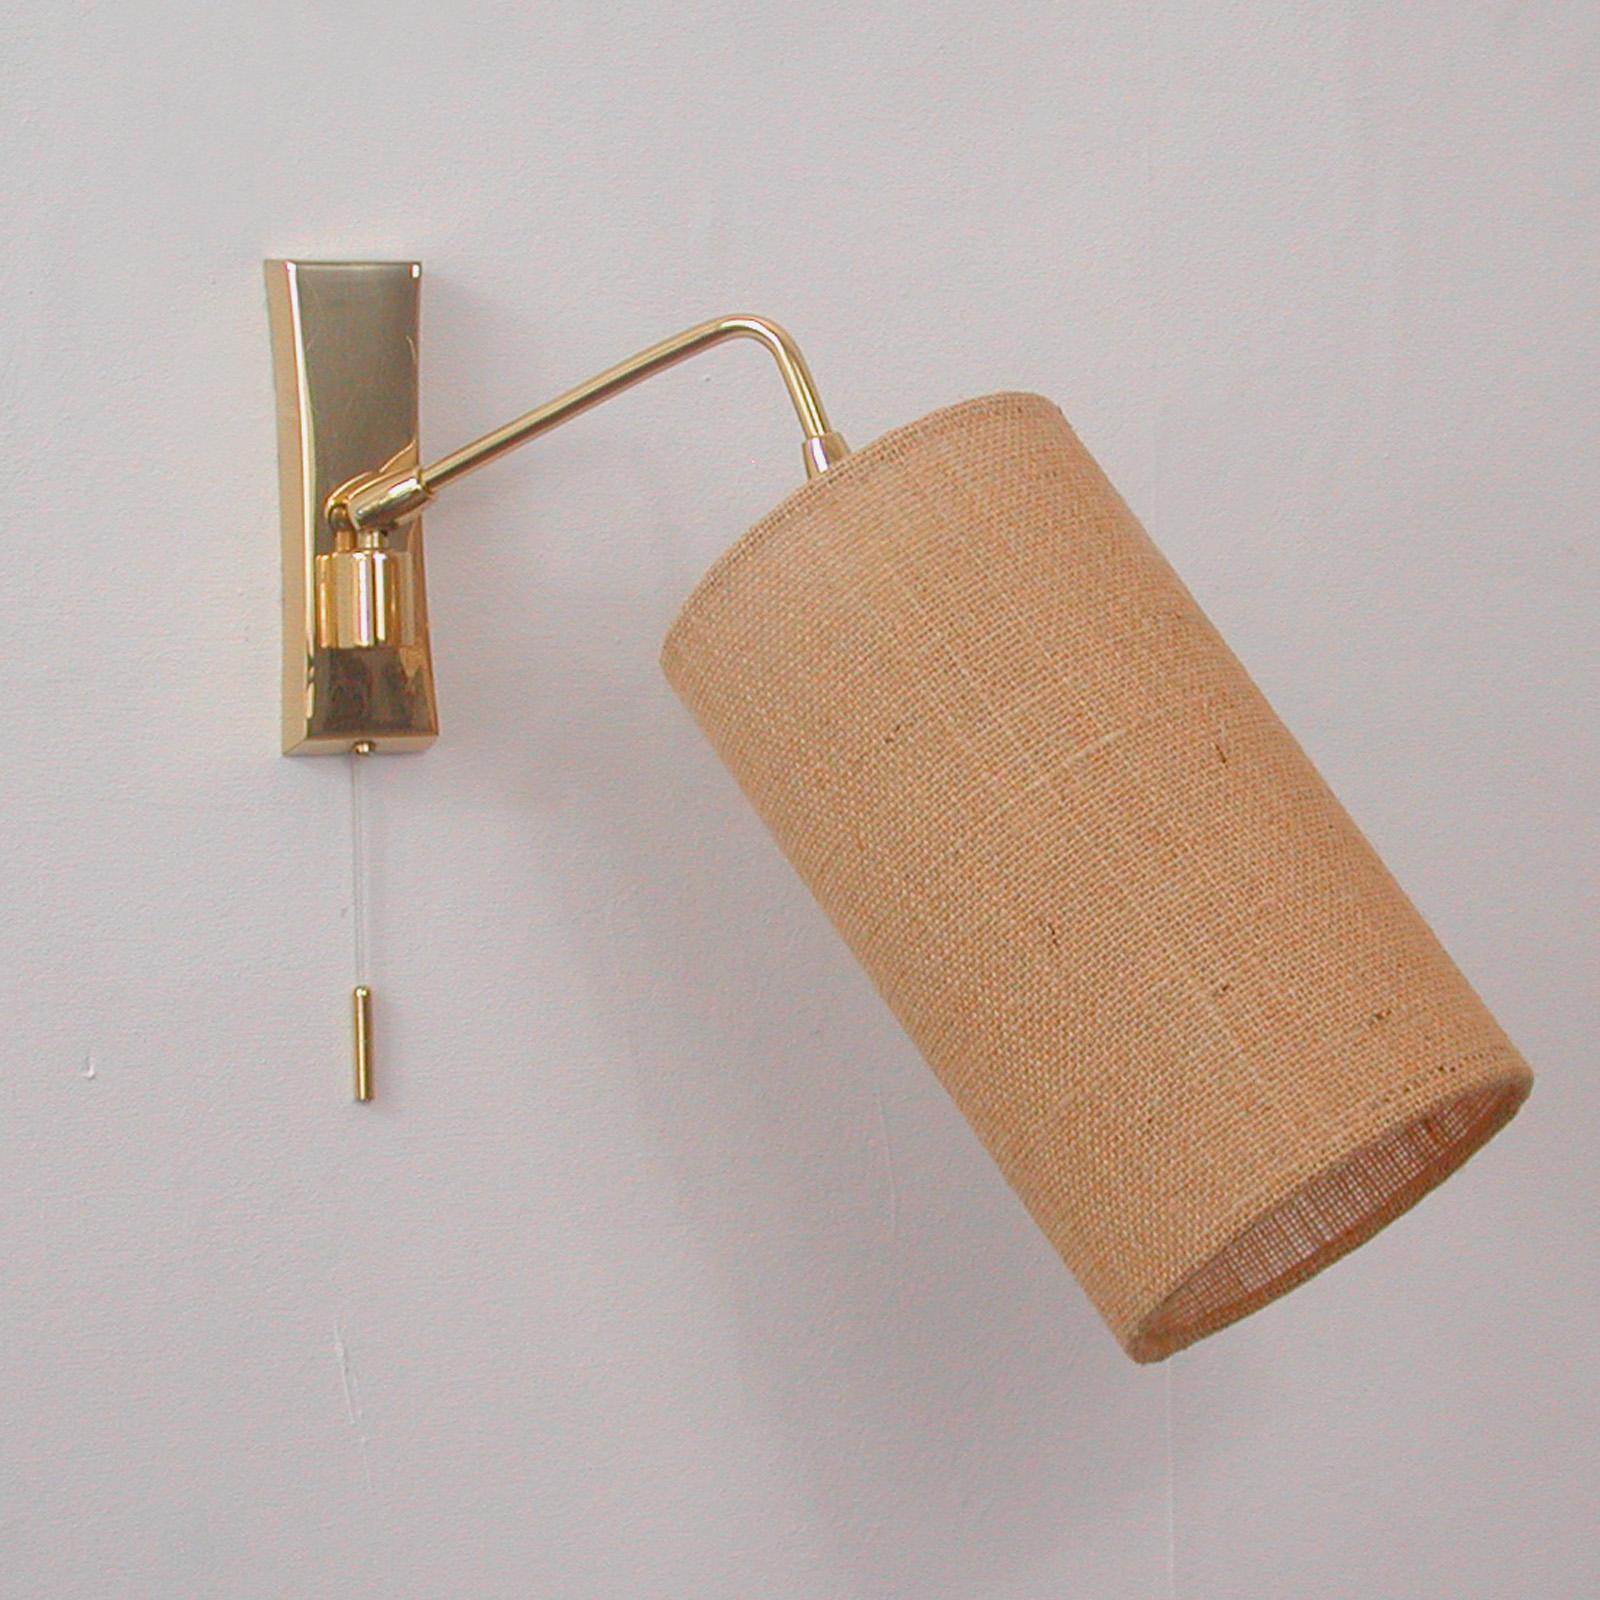 Midcentury Brass and Sisal Adjustable Sconce, Kalmar Attributed., Austria, 1960s For Sale 6